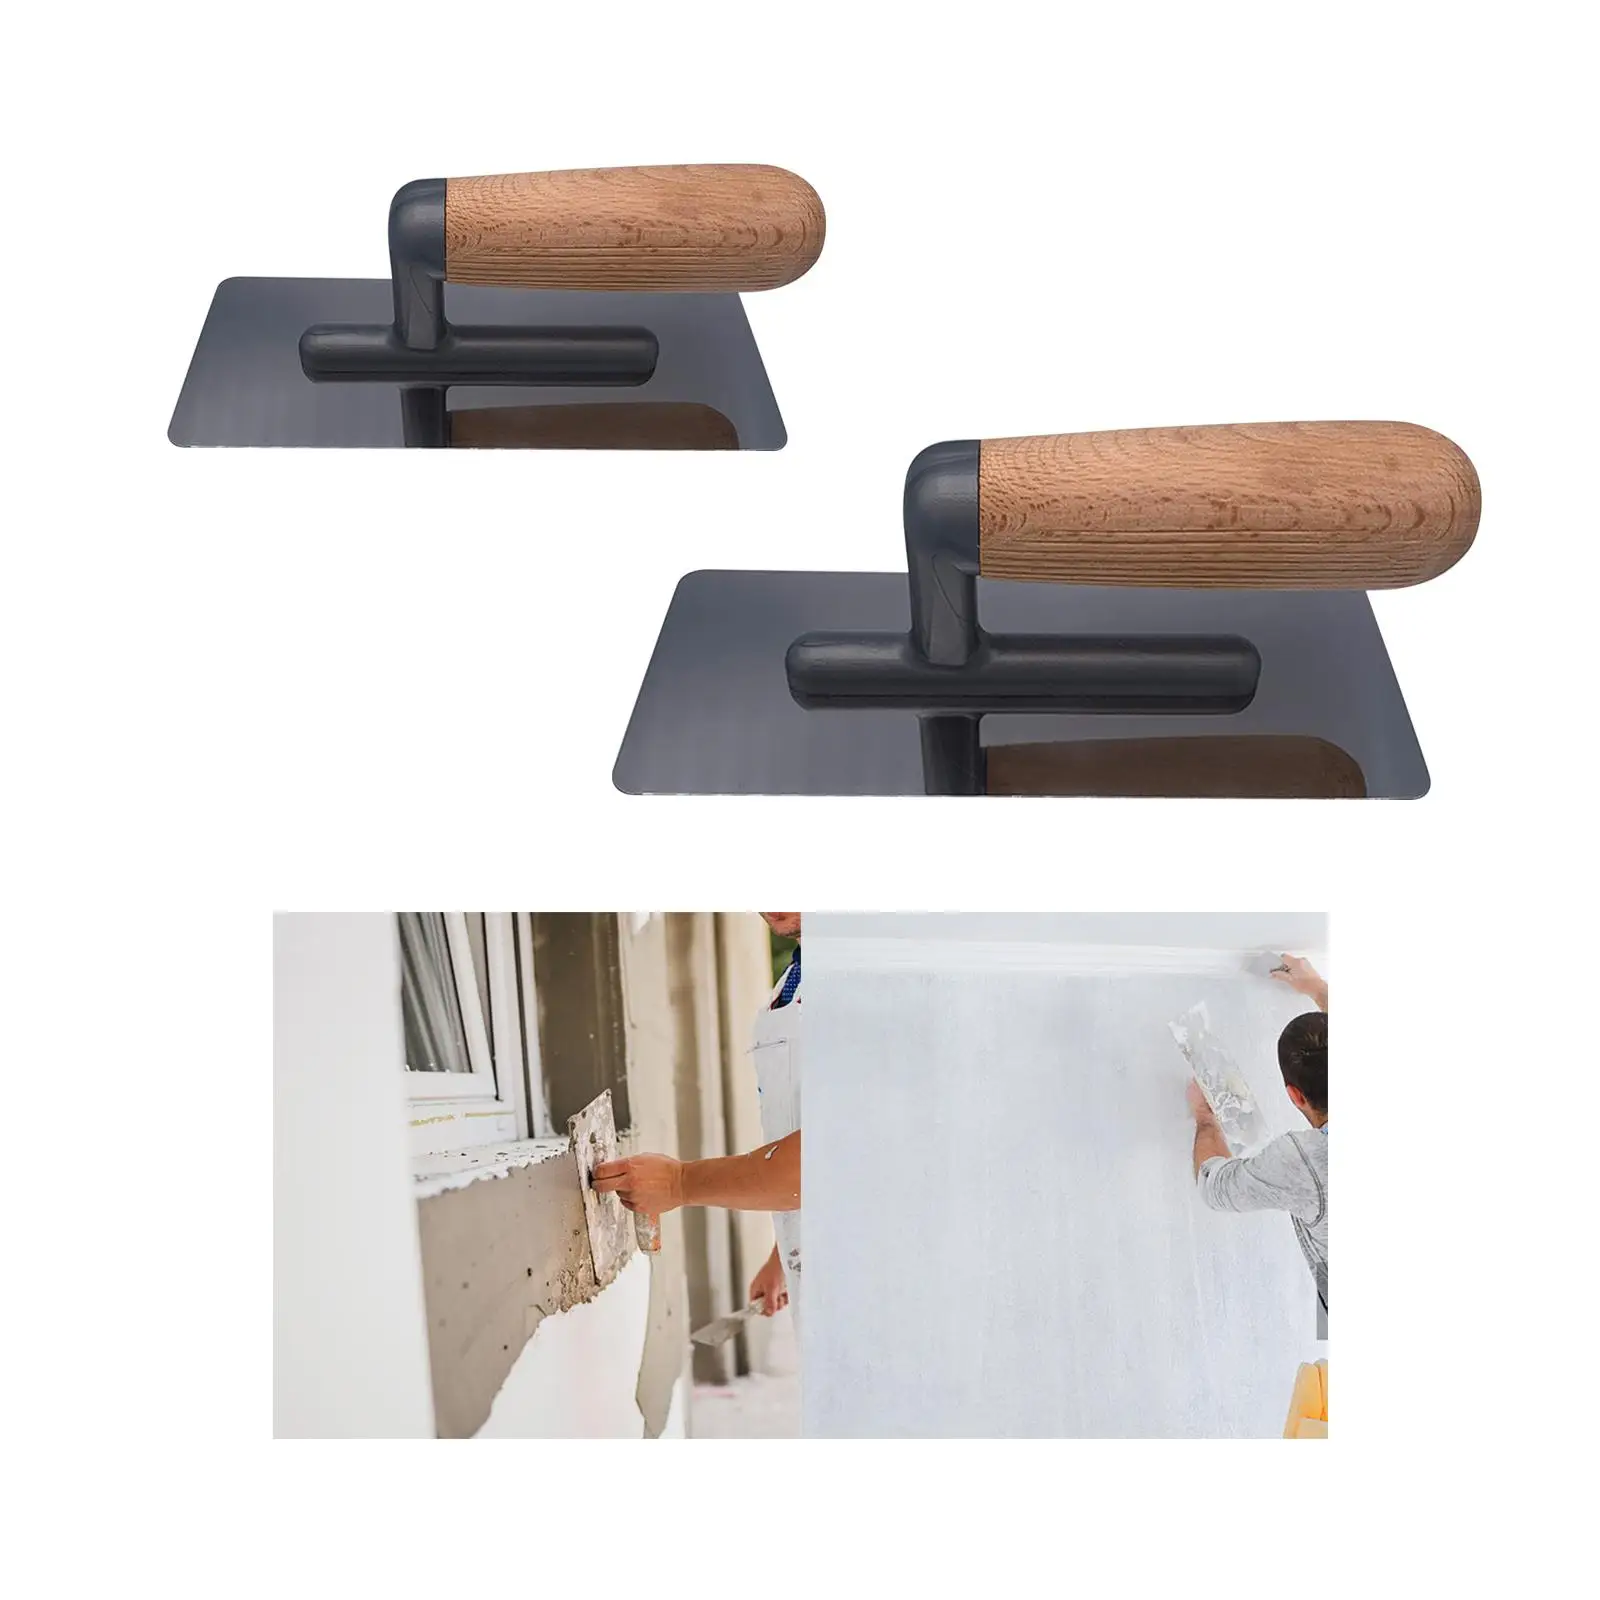 Plastering Trowel Comfort Grip Flat Drywall Trowel Drywall Trowels for Stucco Wall Decoration Applying Putty Wall Construction